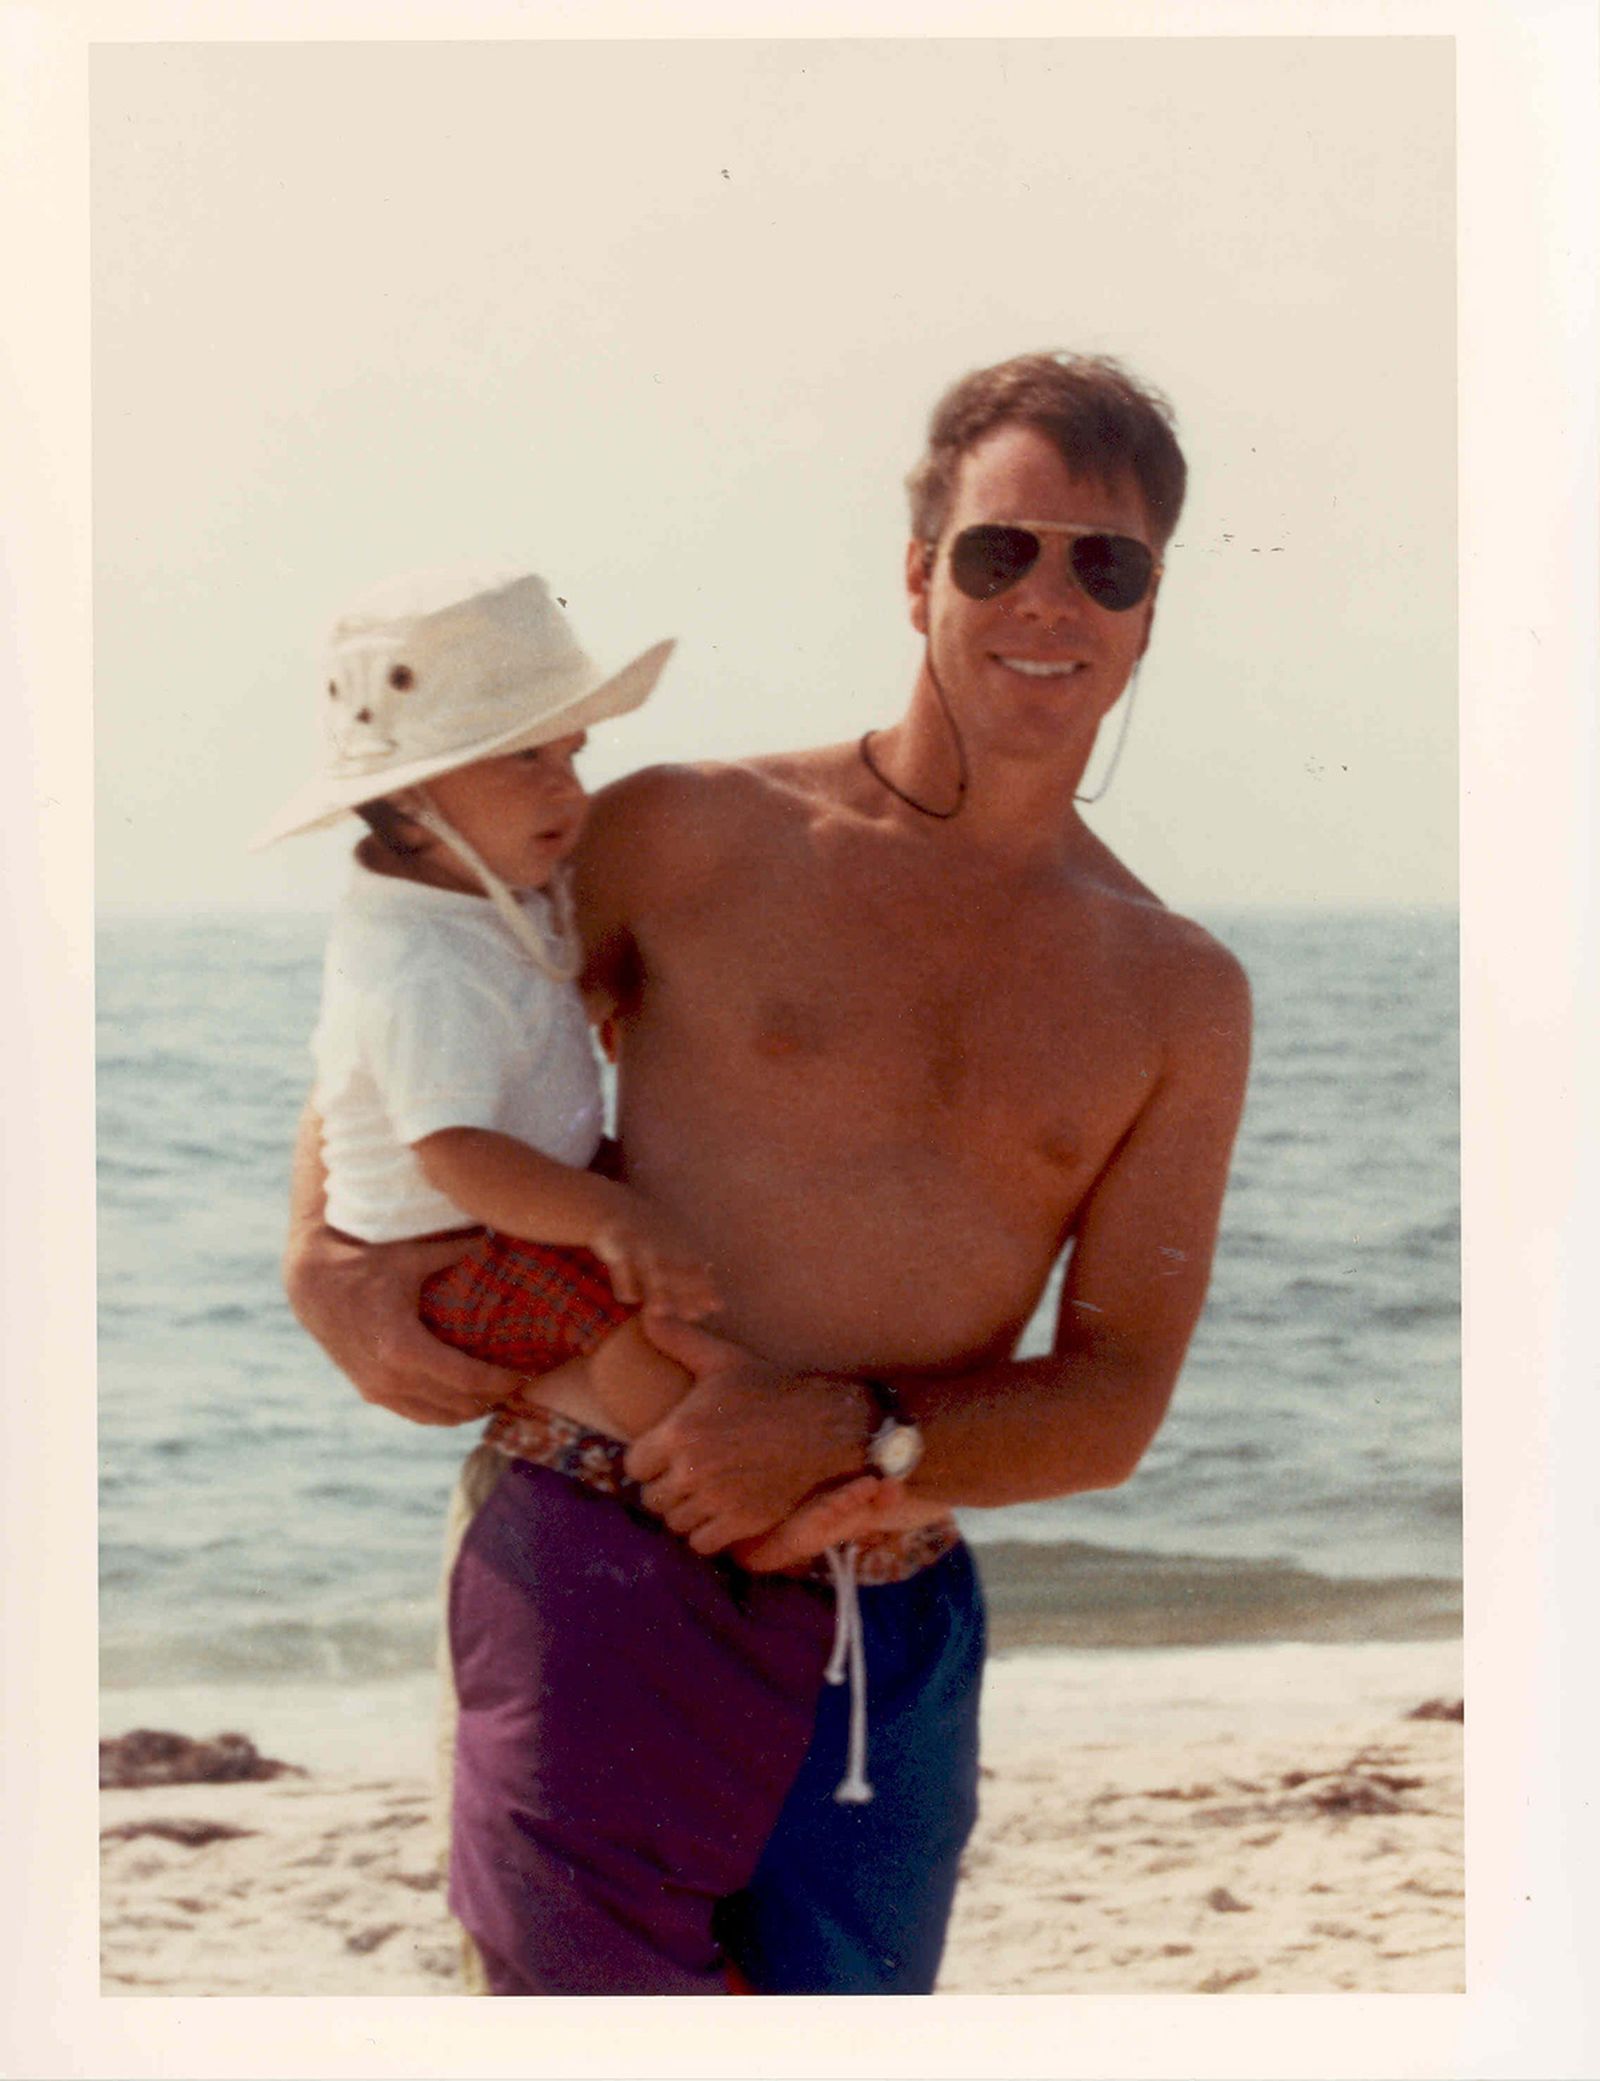  Hilfiger and son Richard in the Hamptons, 1991.